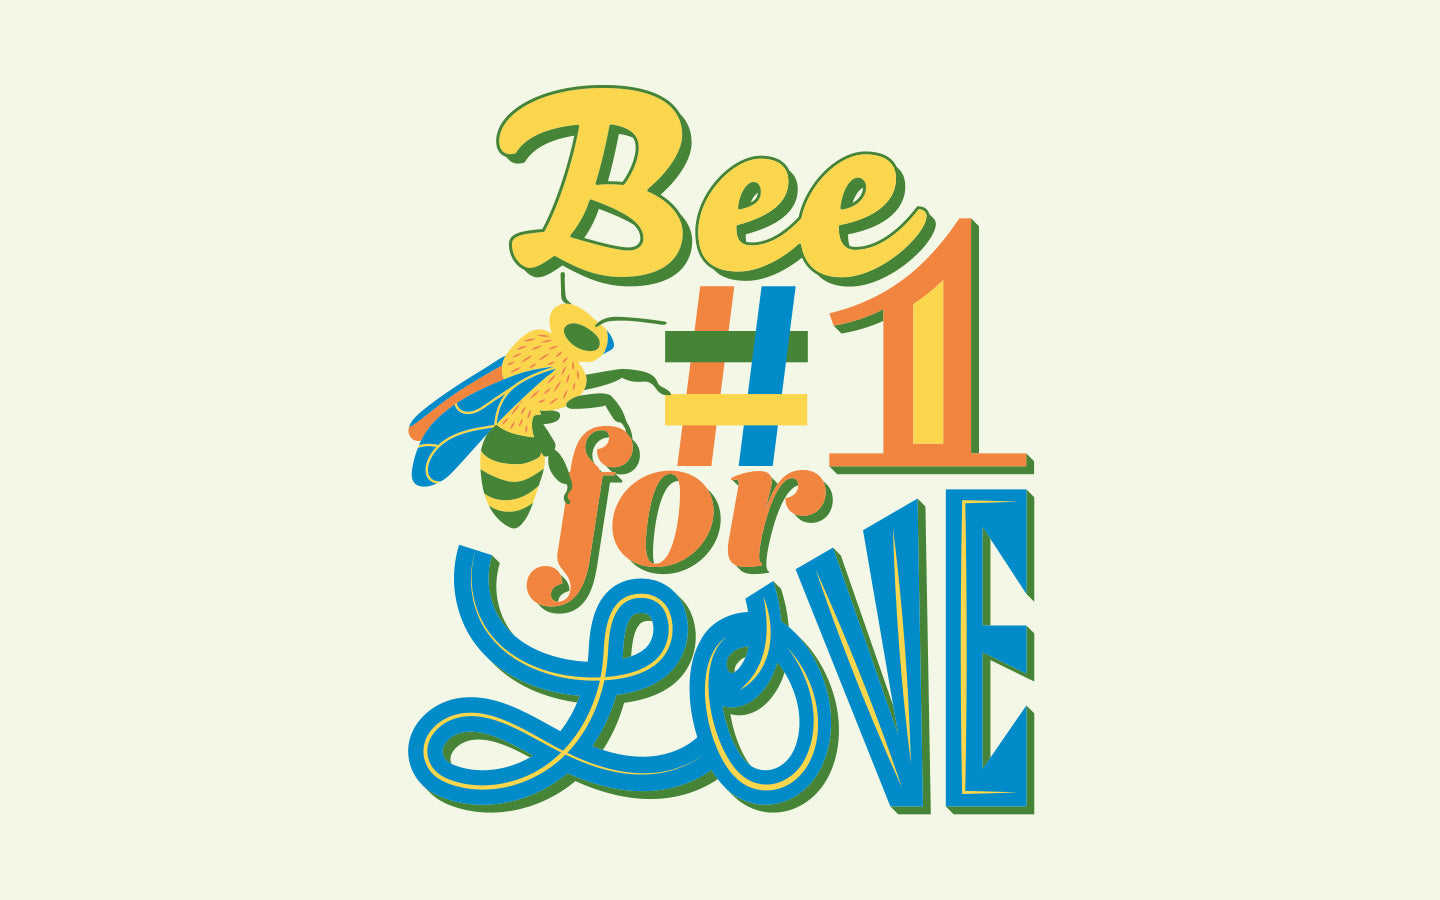 Bee # 1 for Love